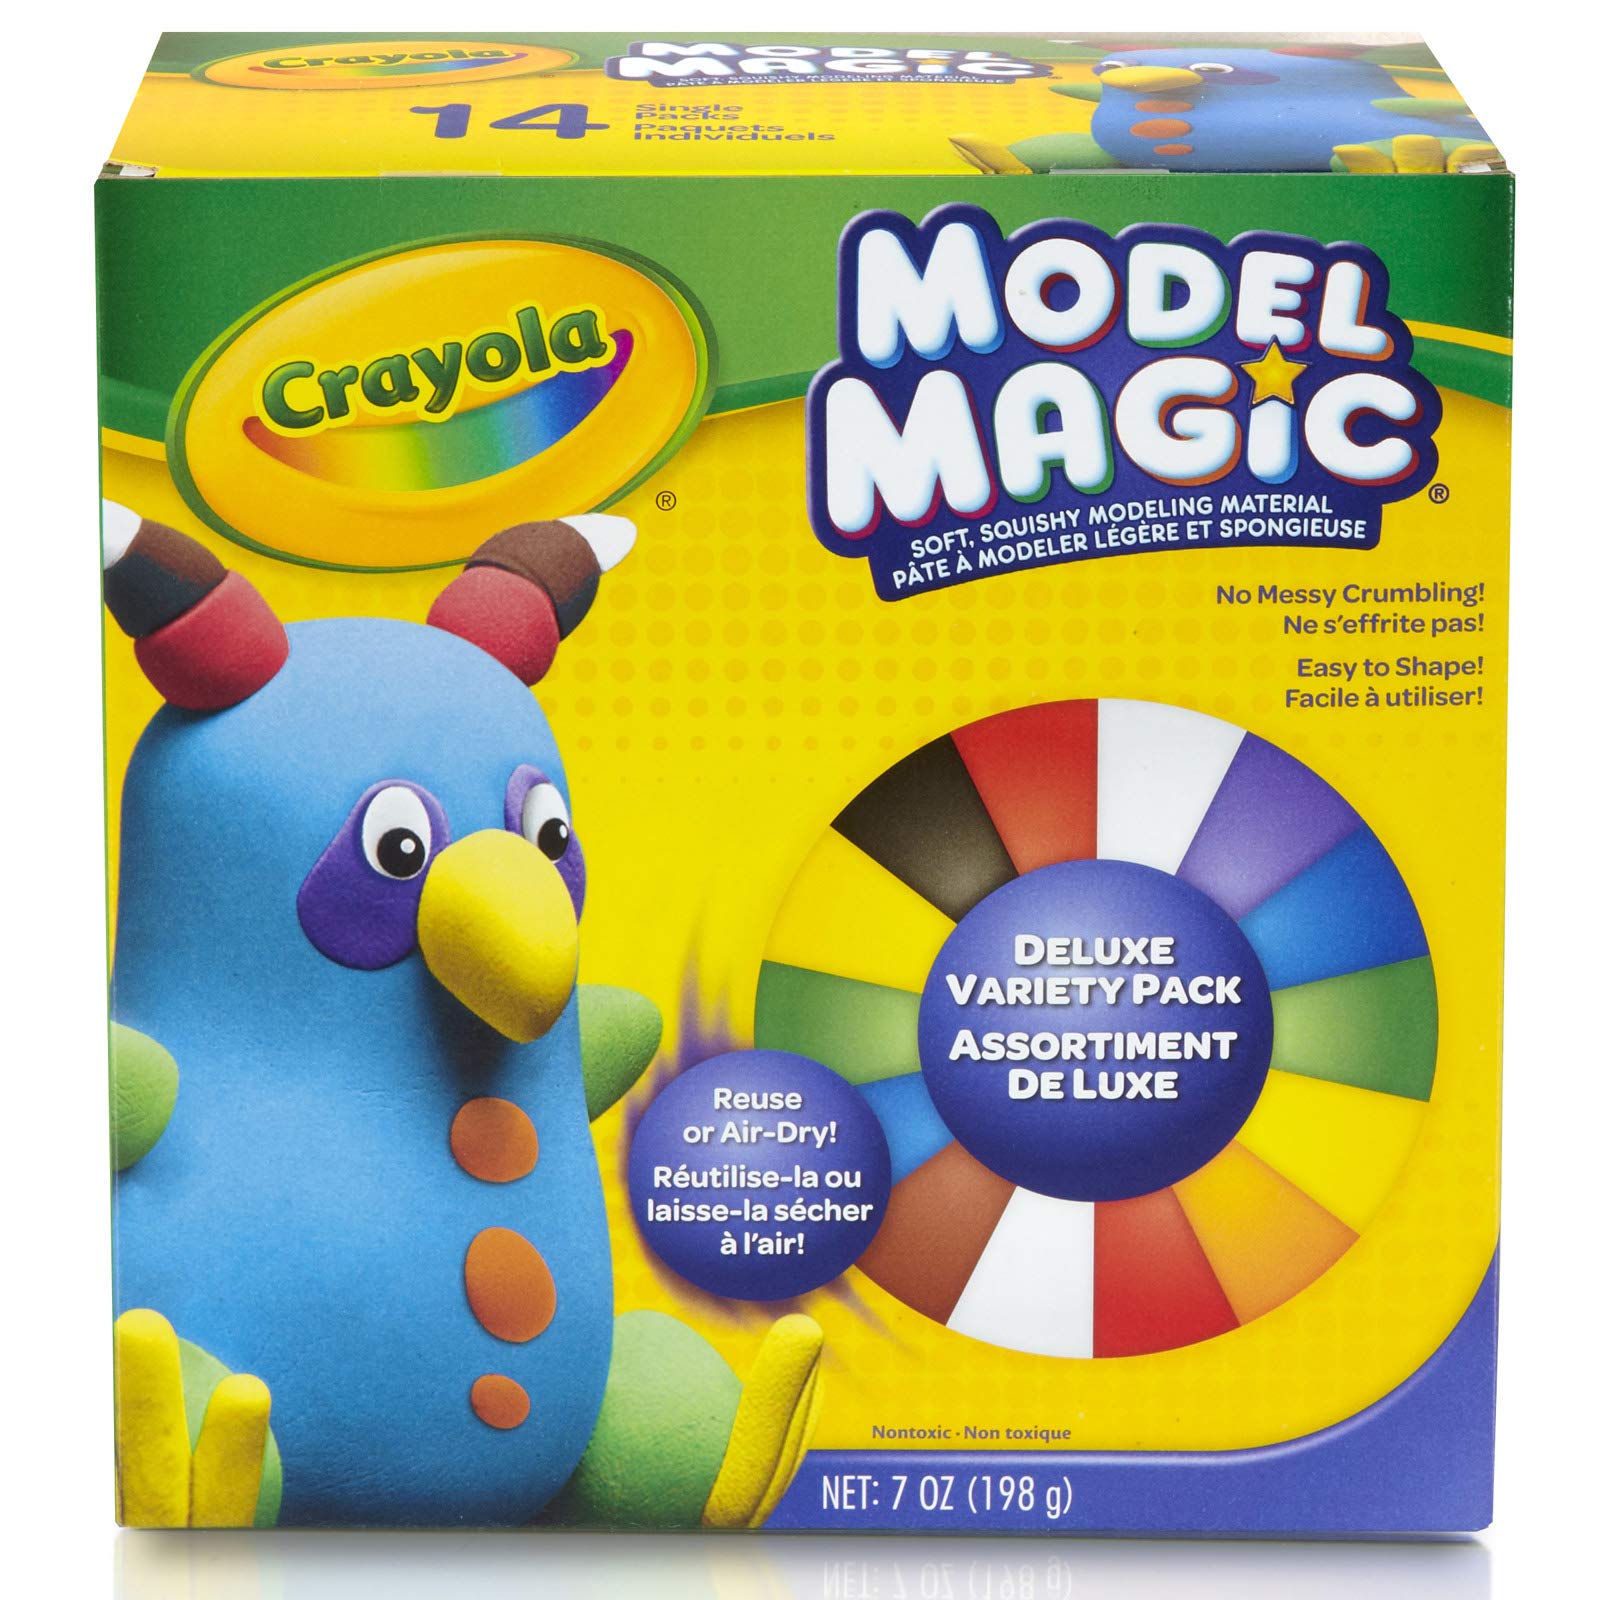 Crayola Model Magic, Modeling Clay Alternative, Gifts for Kids, 14 Single Packs